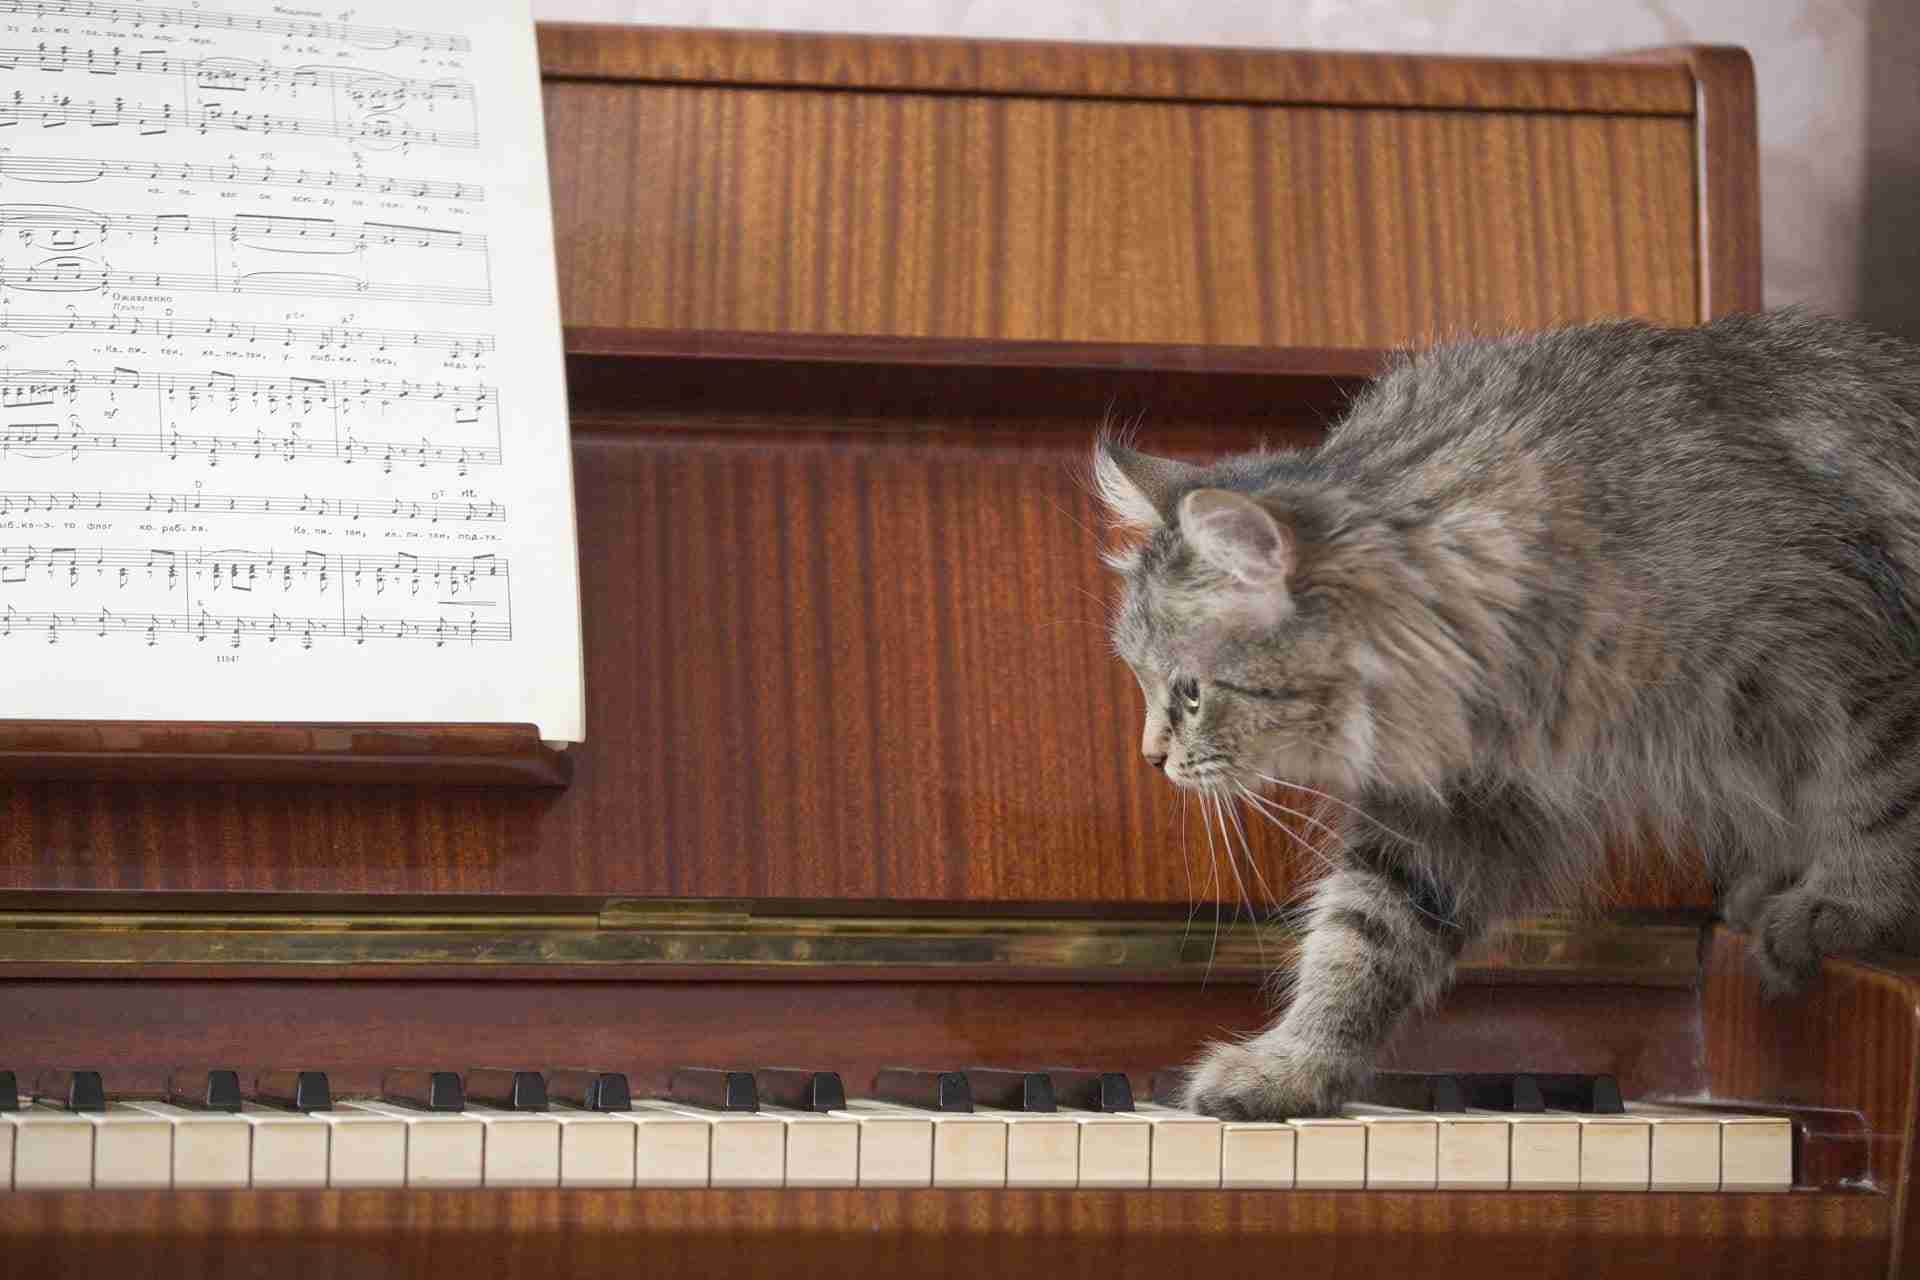 Cats and classical music: relax at the veterinary clinic